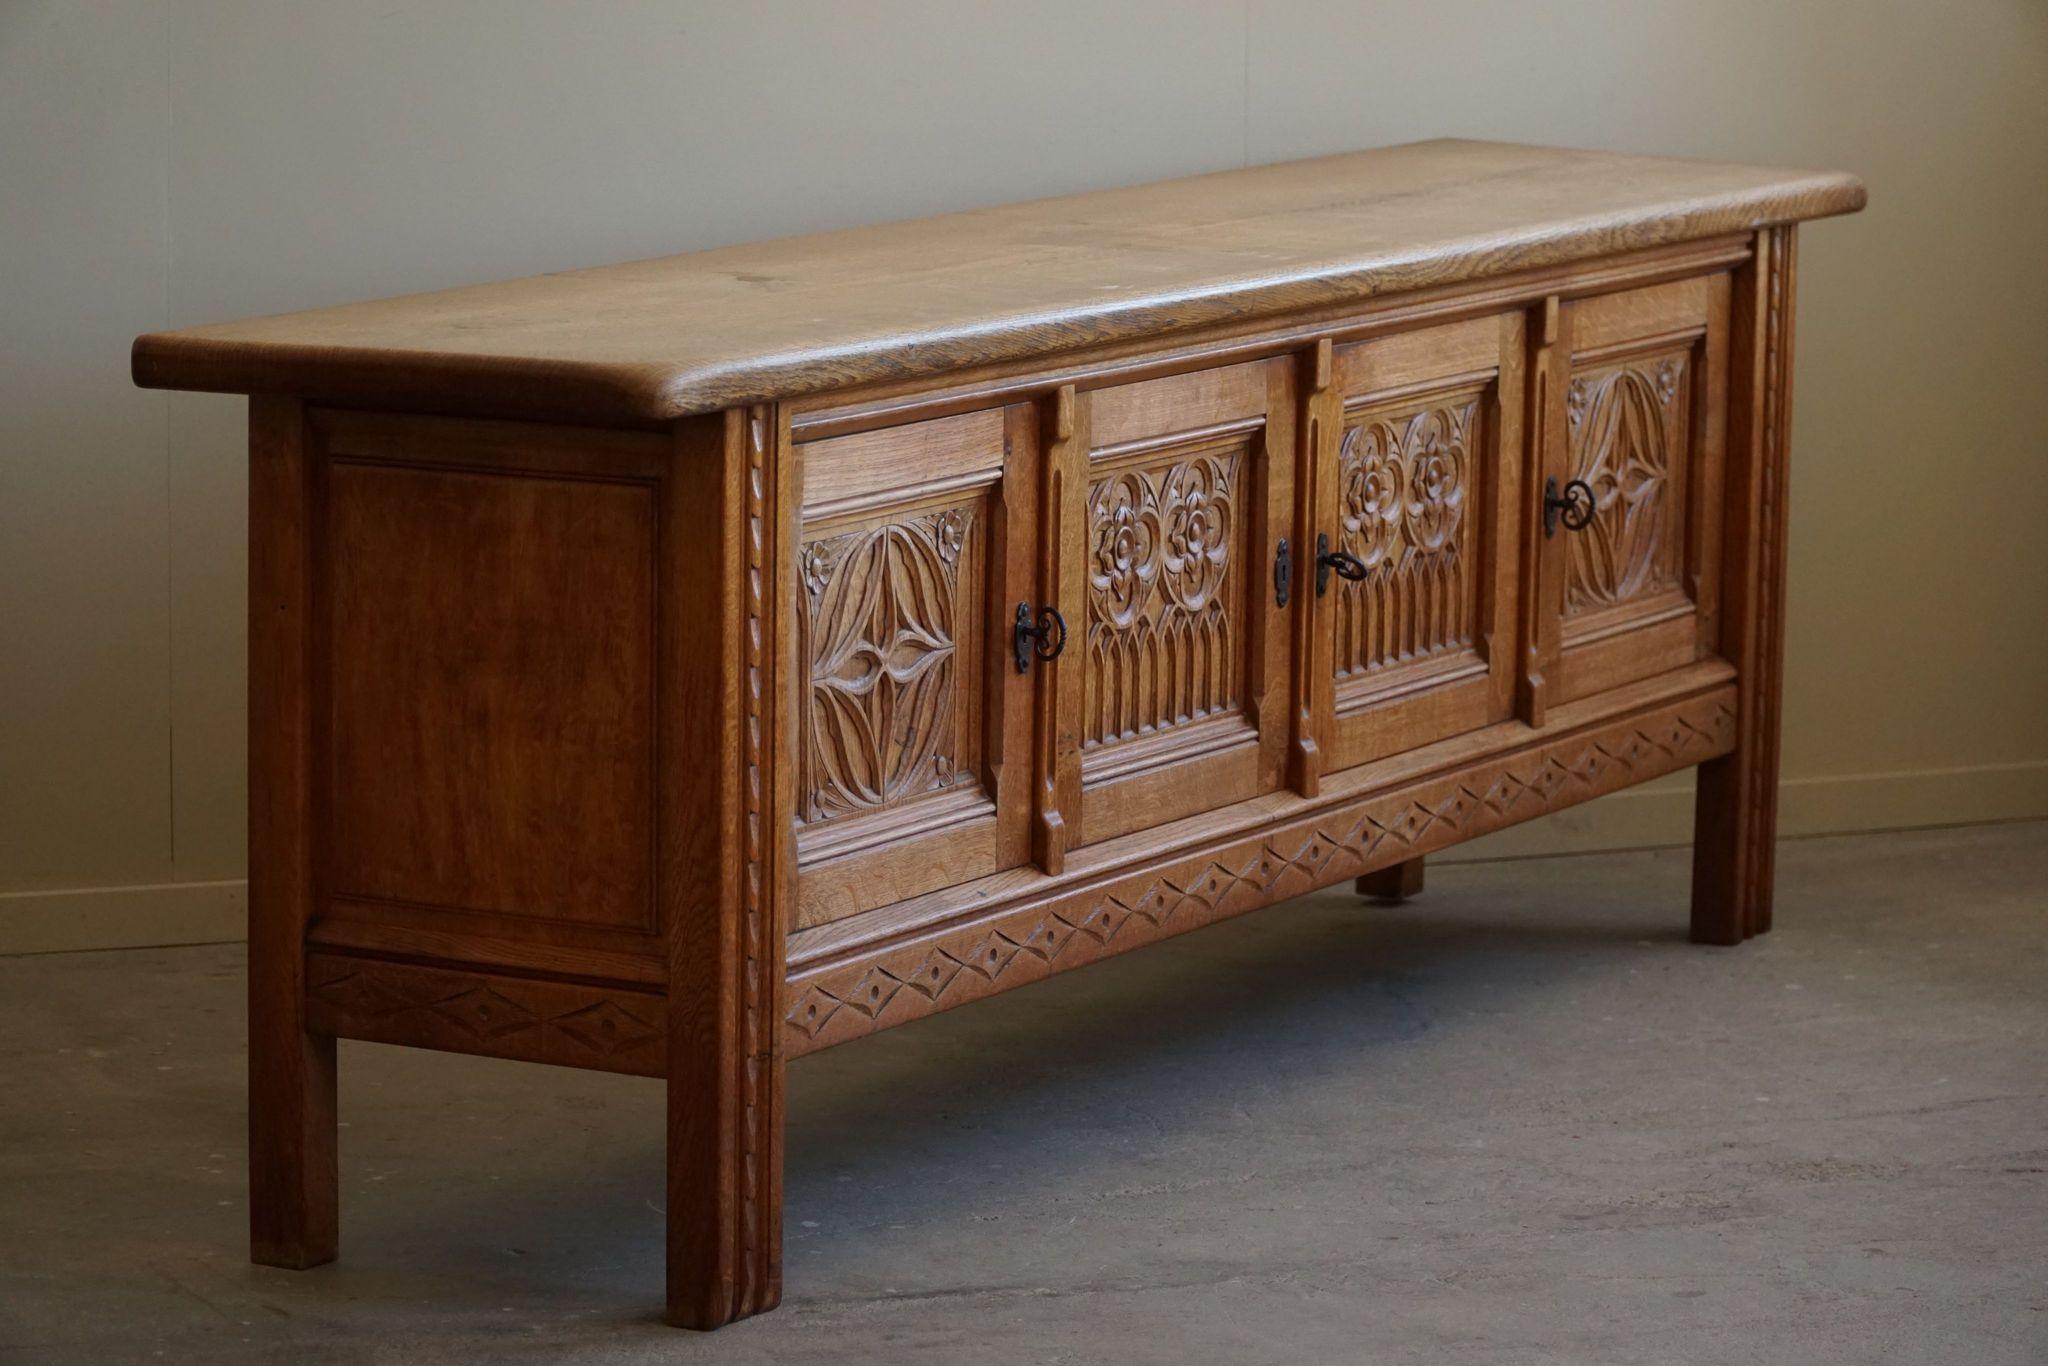 Mid Century Modern Sideboard in Oak, Handcrafted by a Danish Cabinetmaker, 1950s For Sale 2